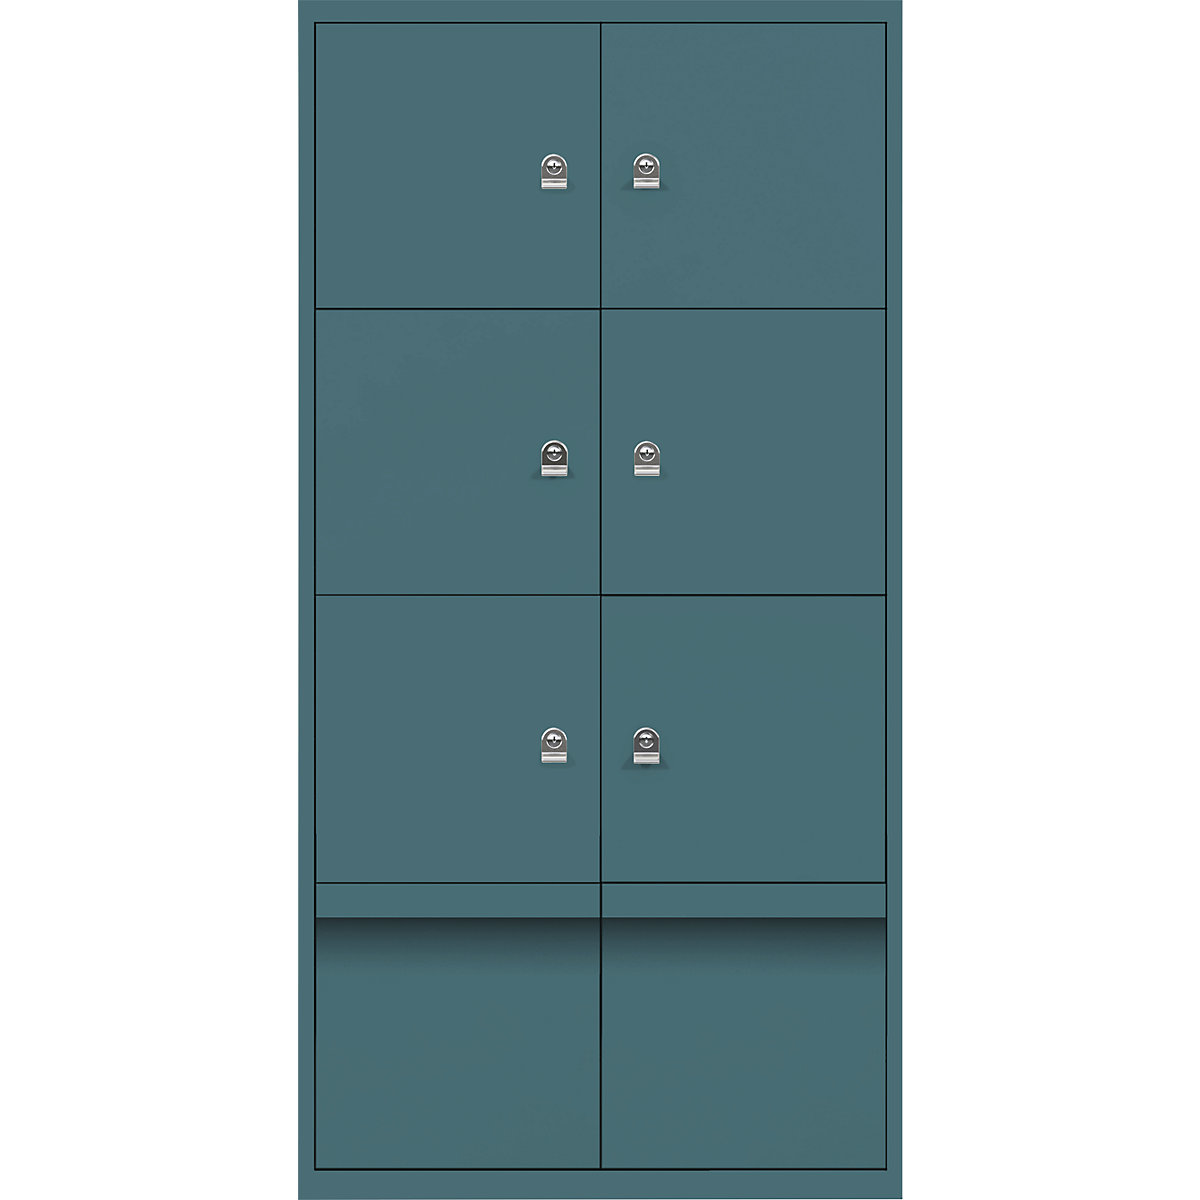 BISLEY – LateralFile™ lodge, with 6 lockable compartments and 2 drawers, height 375 mm each, doulton